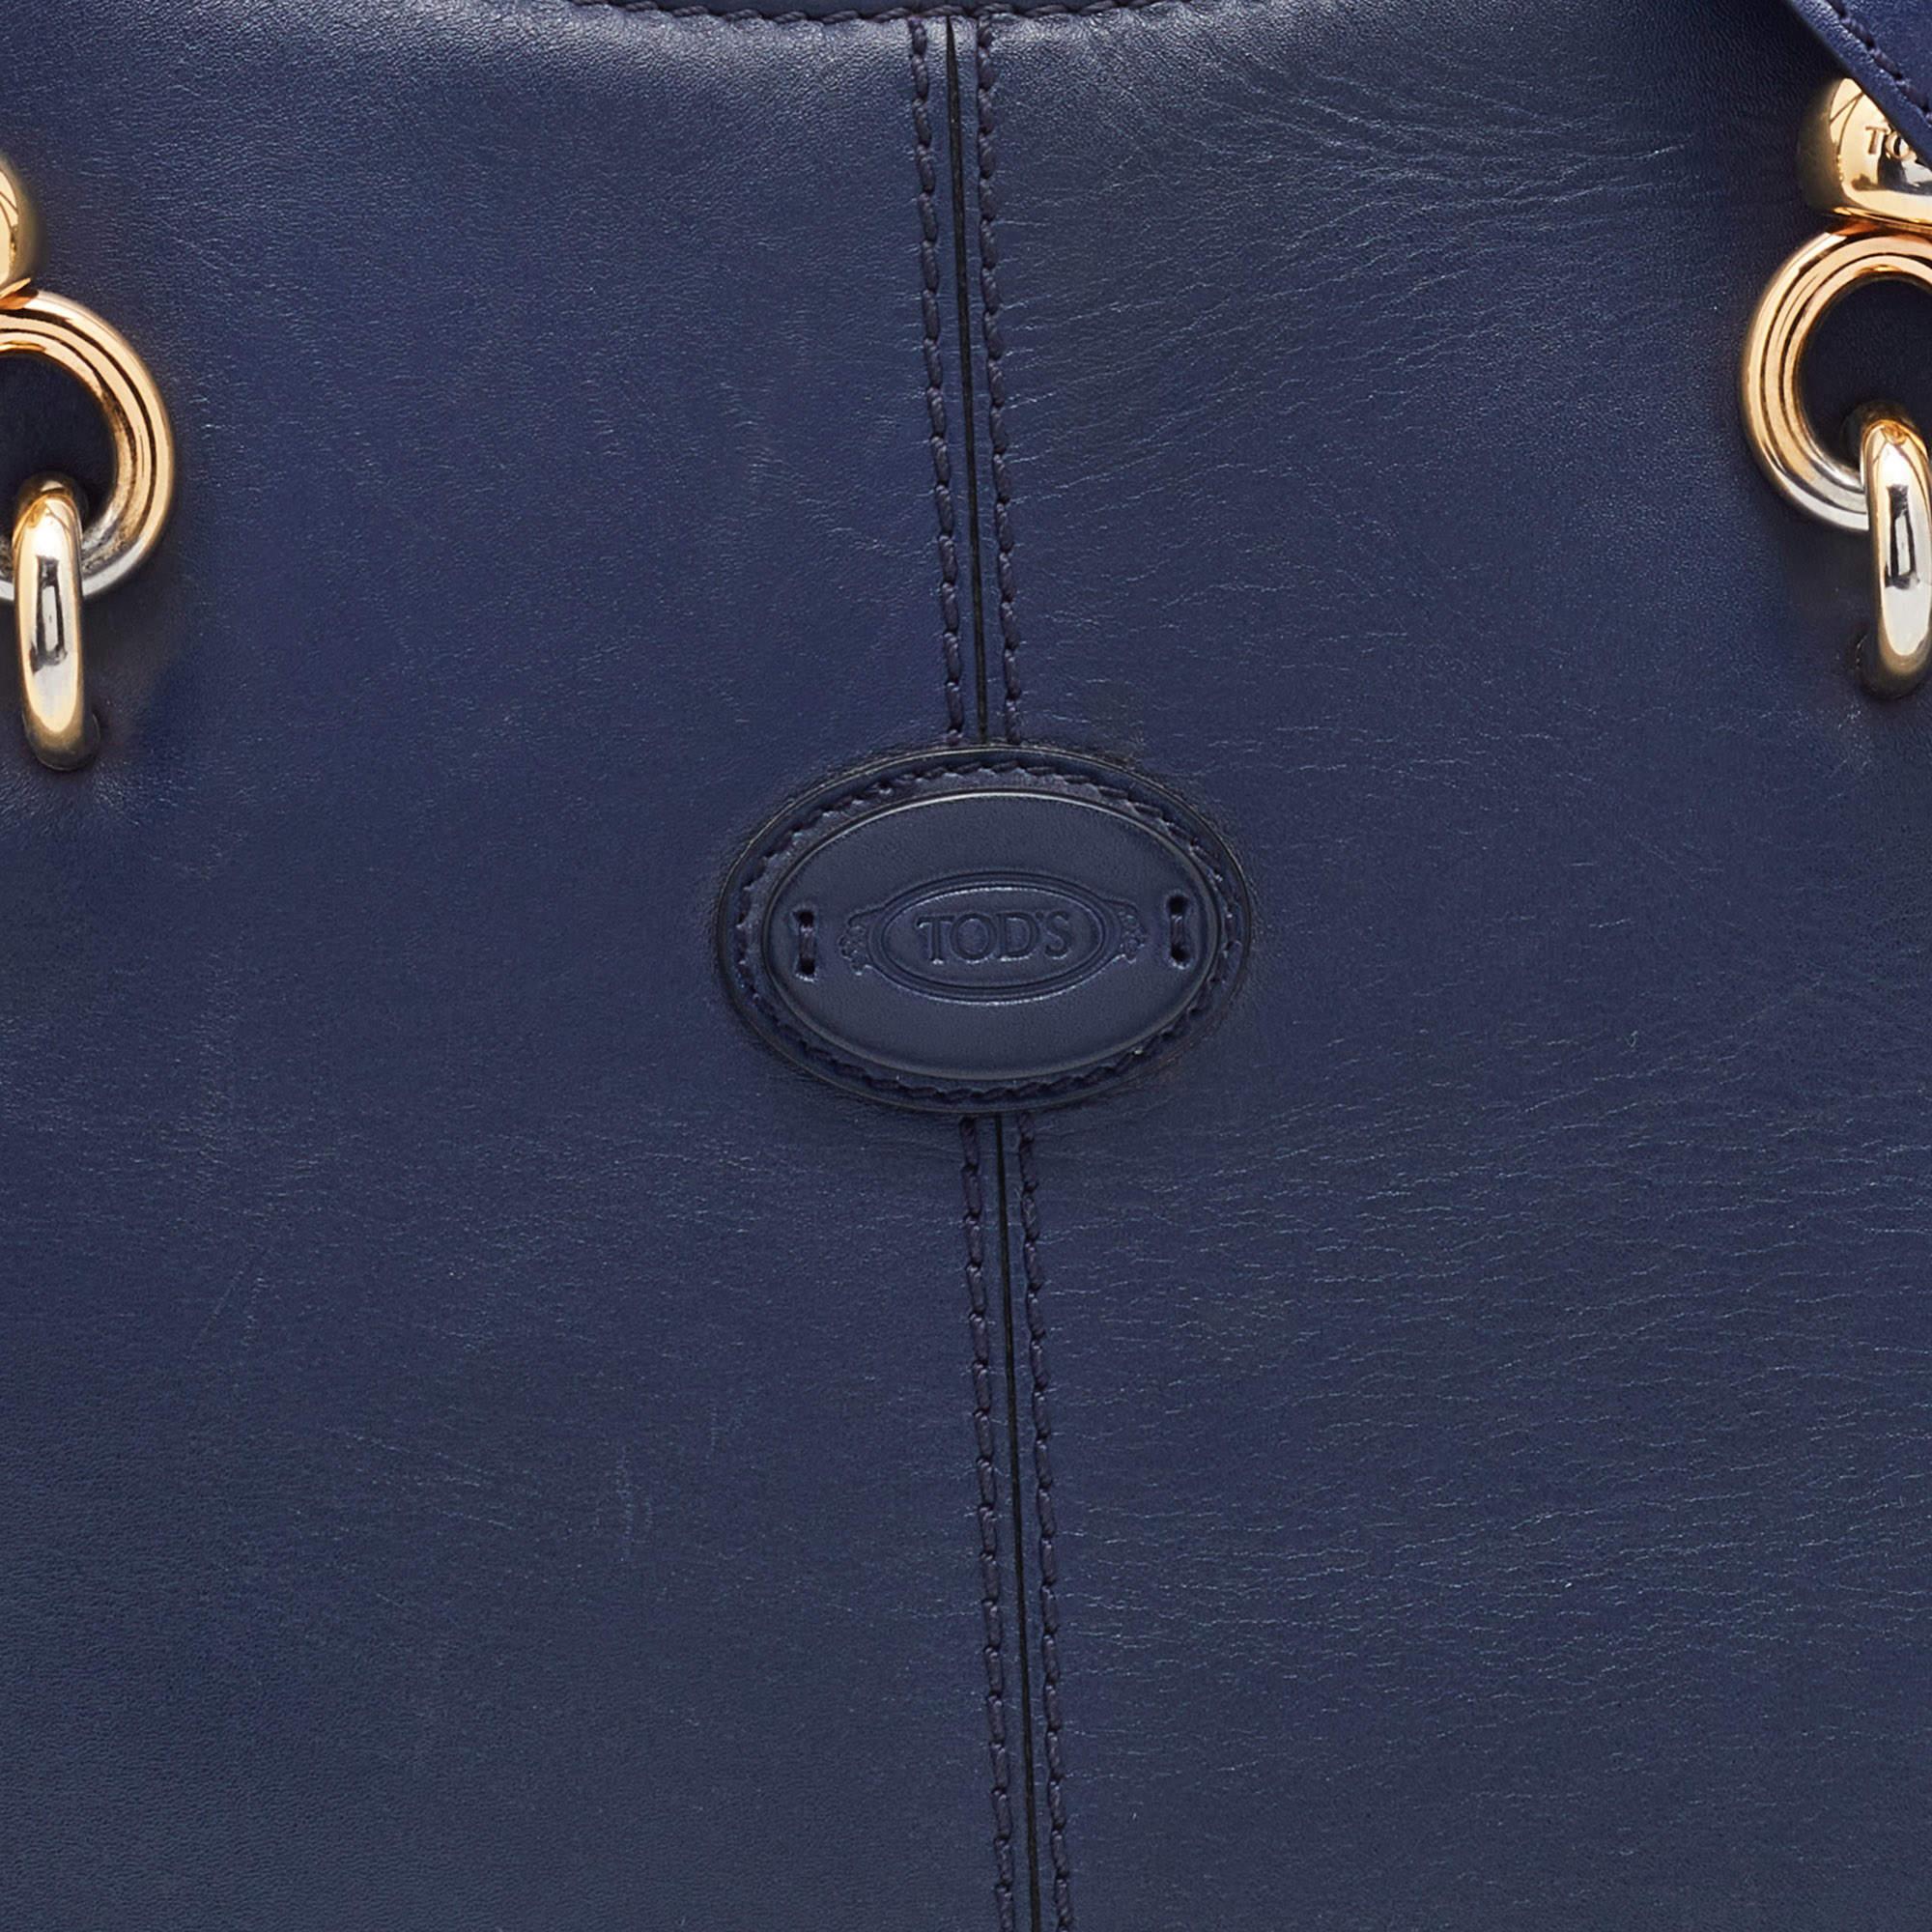 Tod's Navy Blue Leather Sella Satchel 2